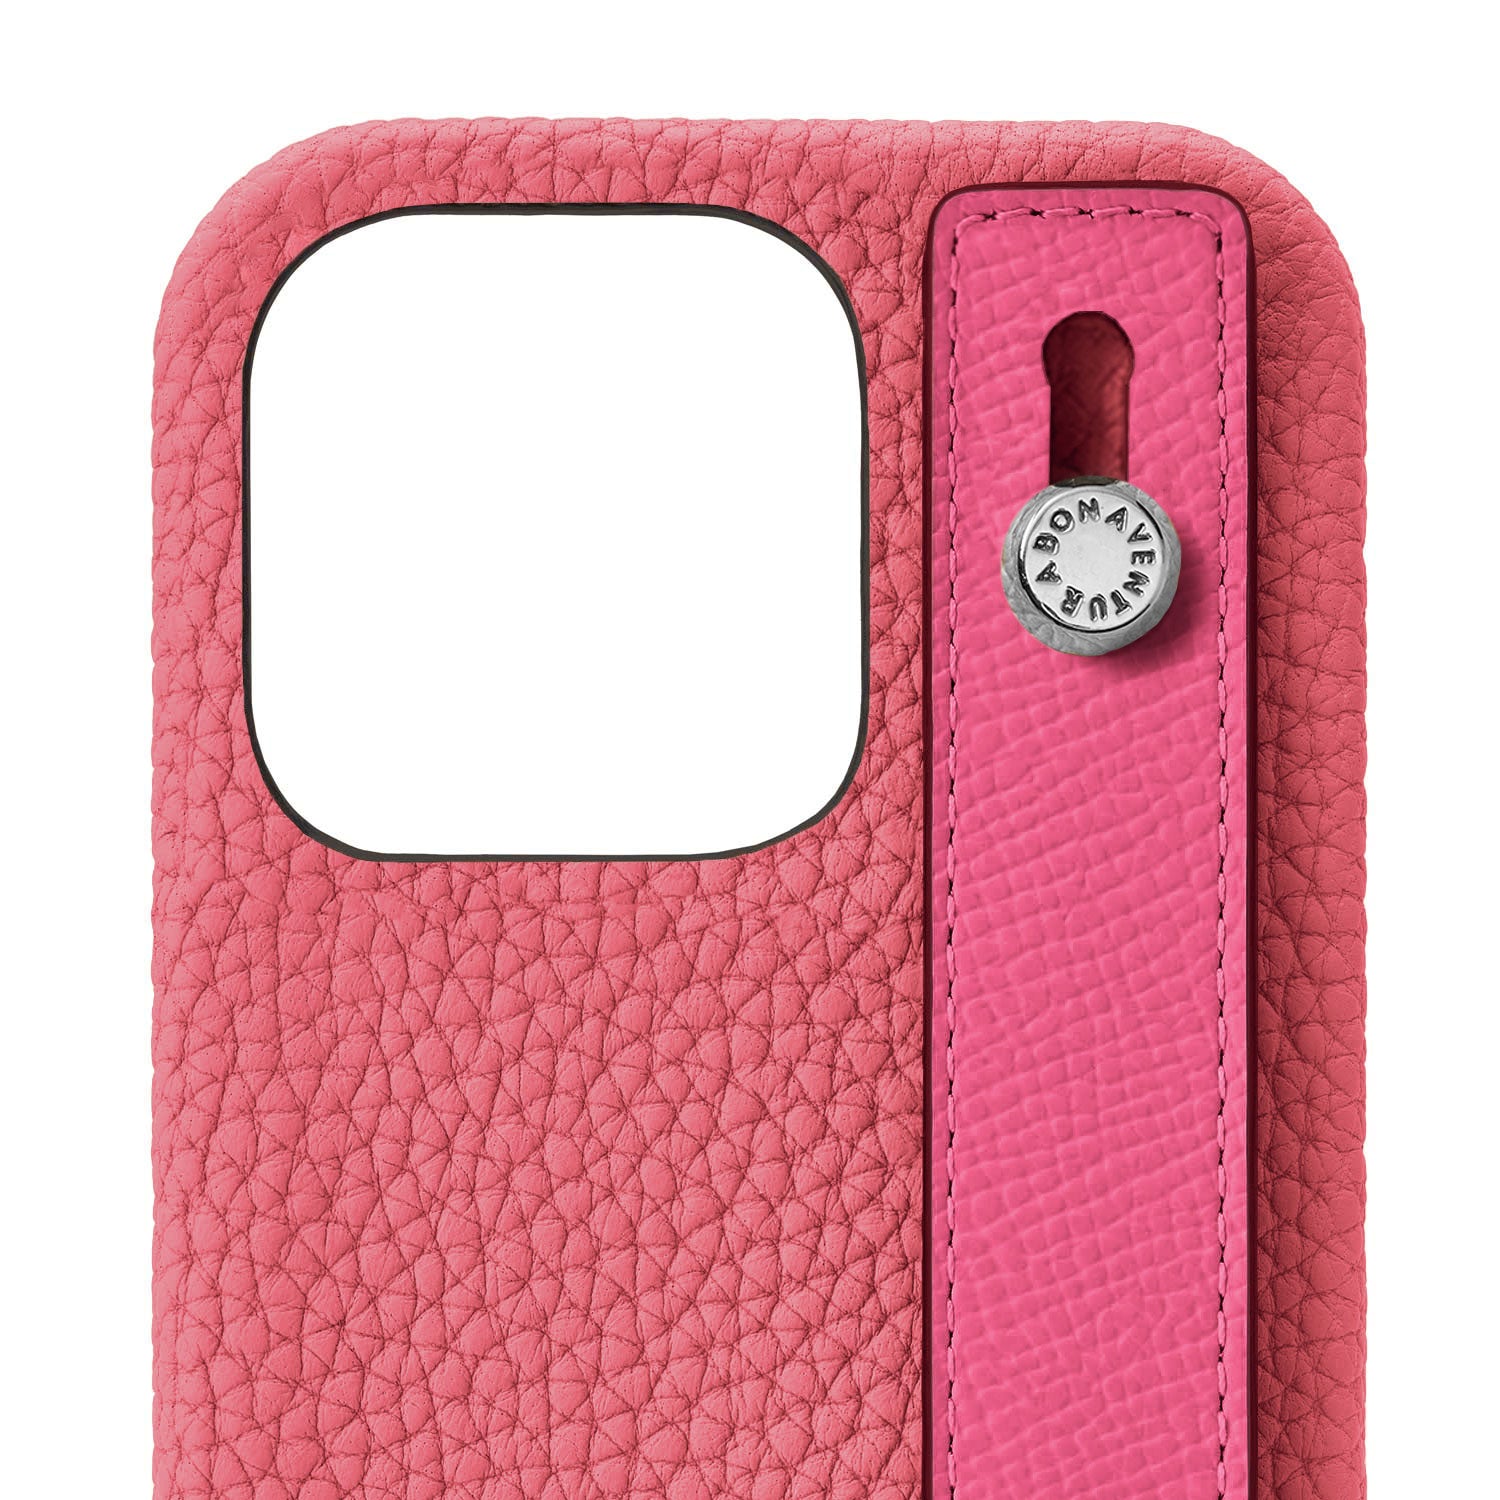 (iPhone 13 Pro Max) Back cover case with handle, shrink leather